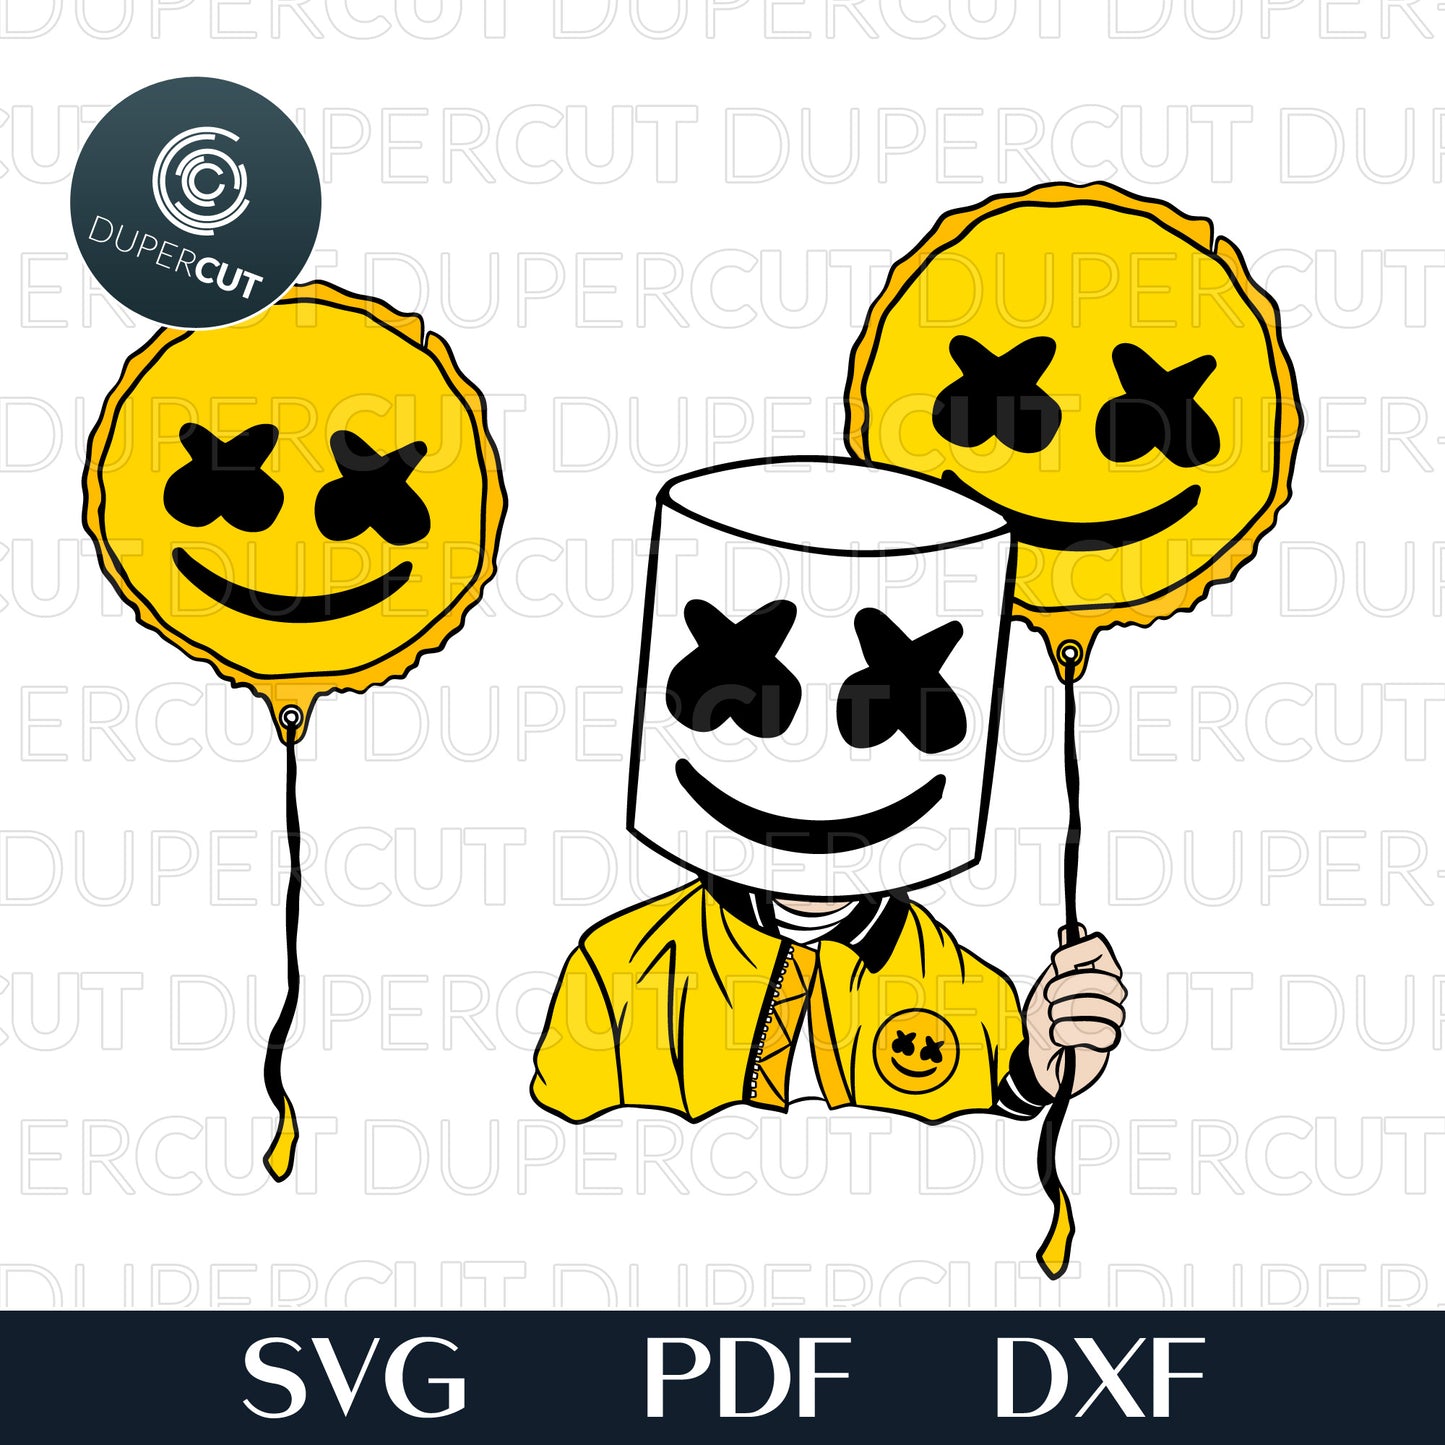 Happier Marshmello DJ color Illustration, fan art custom design. Printable SVG PNG files. For Birthday party, crafting, print and cut.